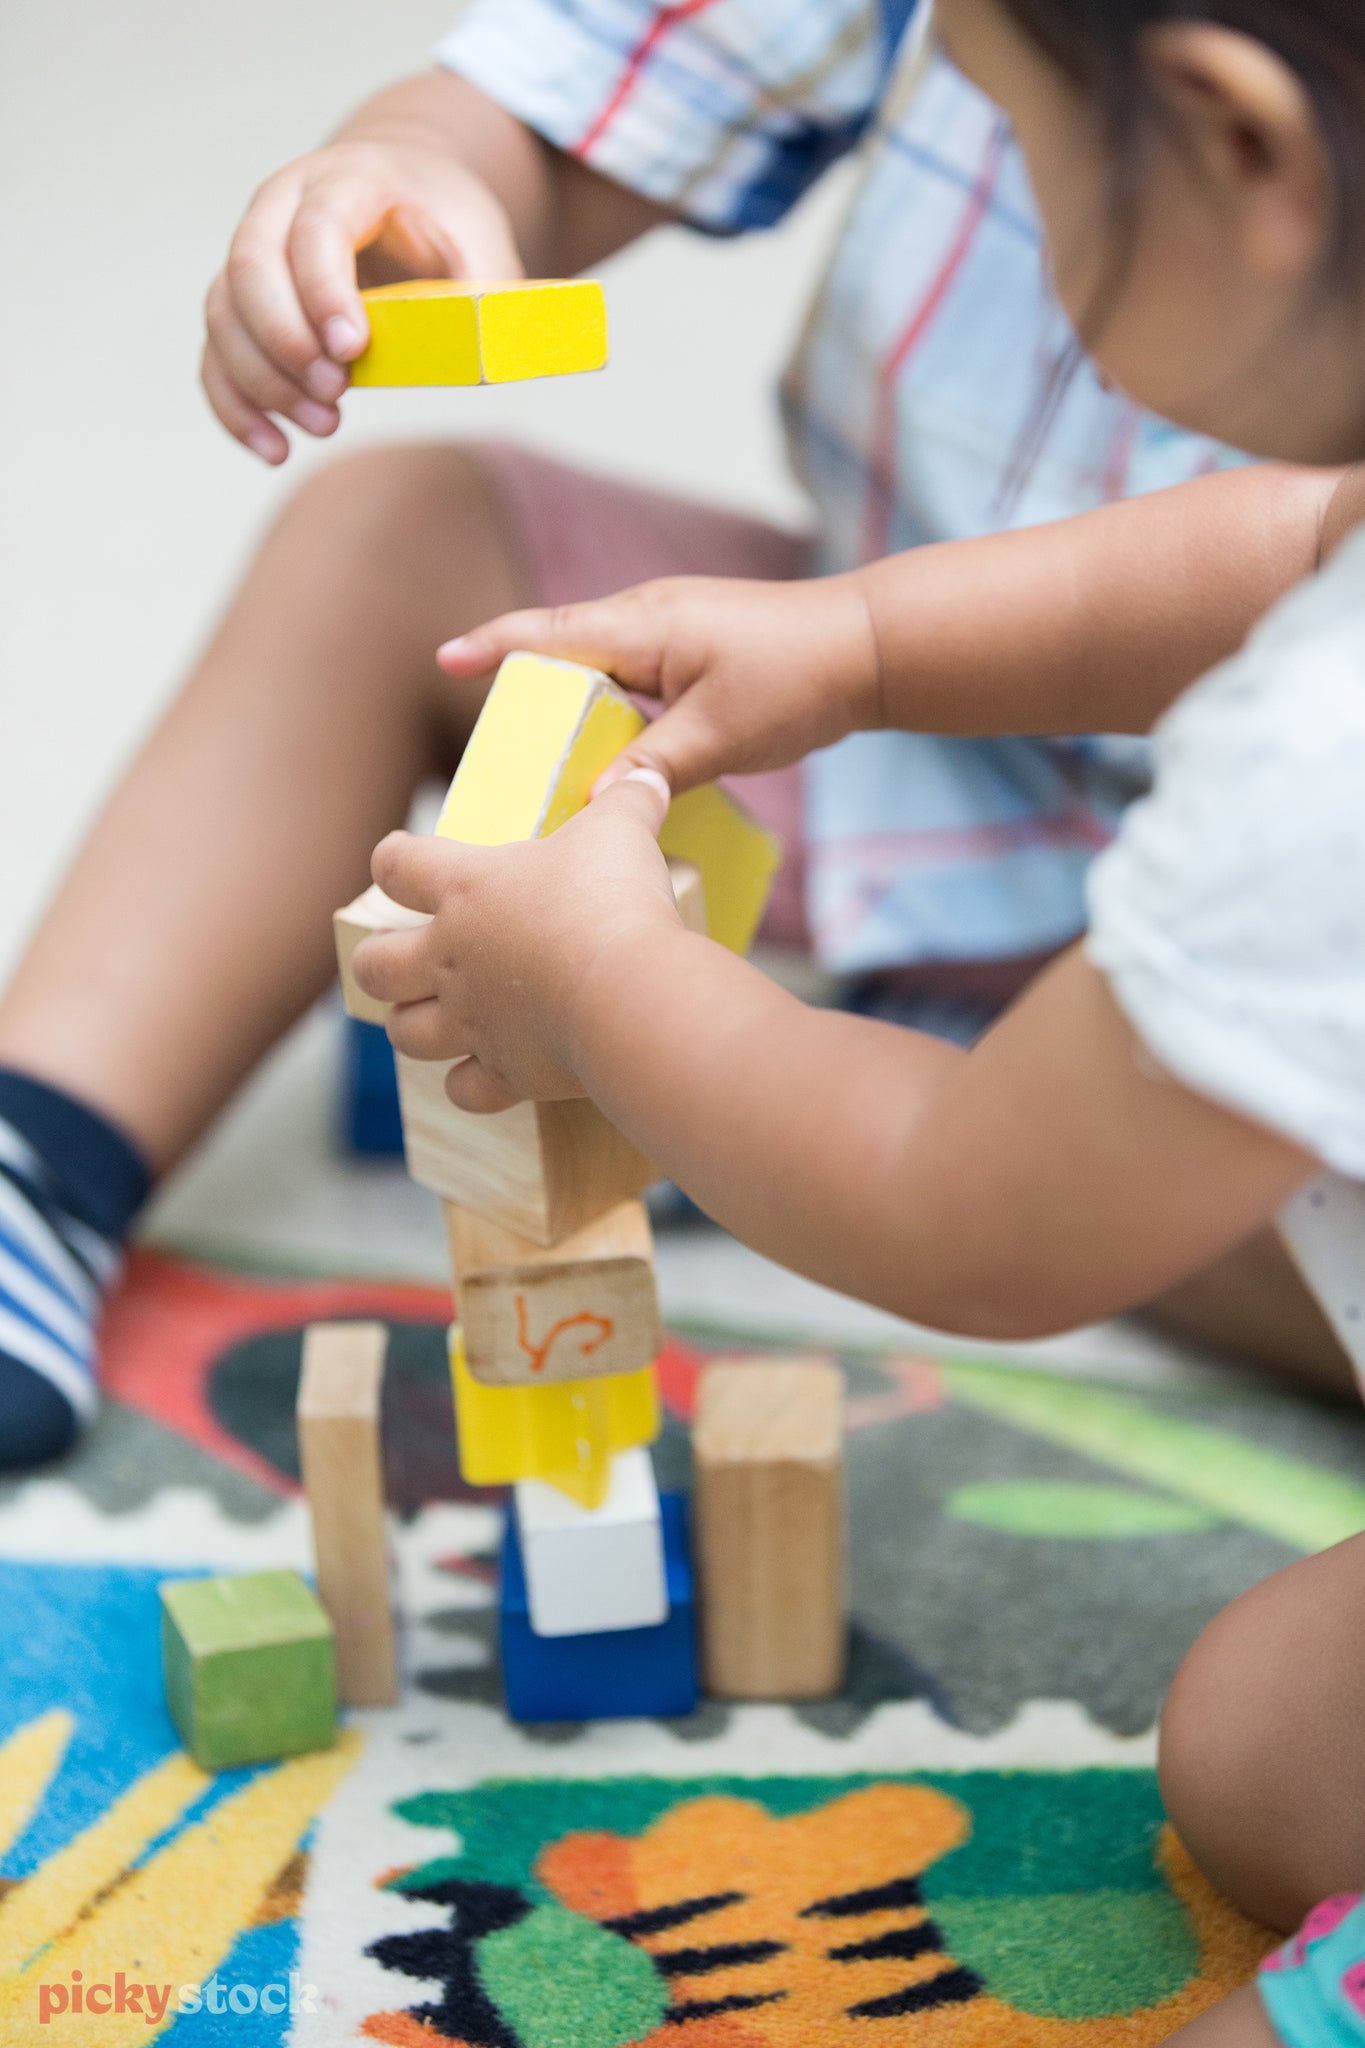 Toddlers play with building blocks, stacking the colourfull basic blocks on top of each other to form a little tower. 